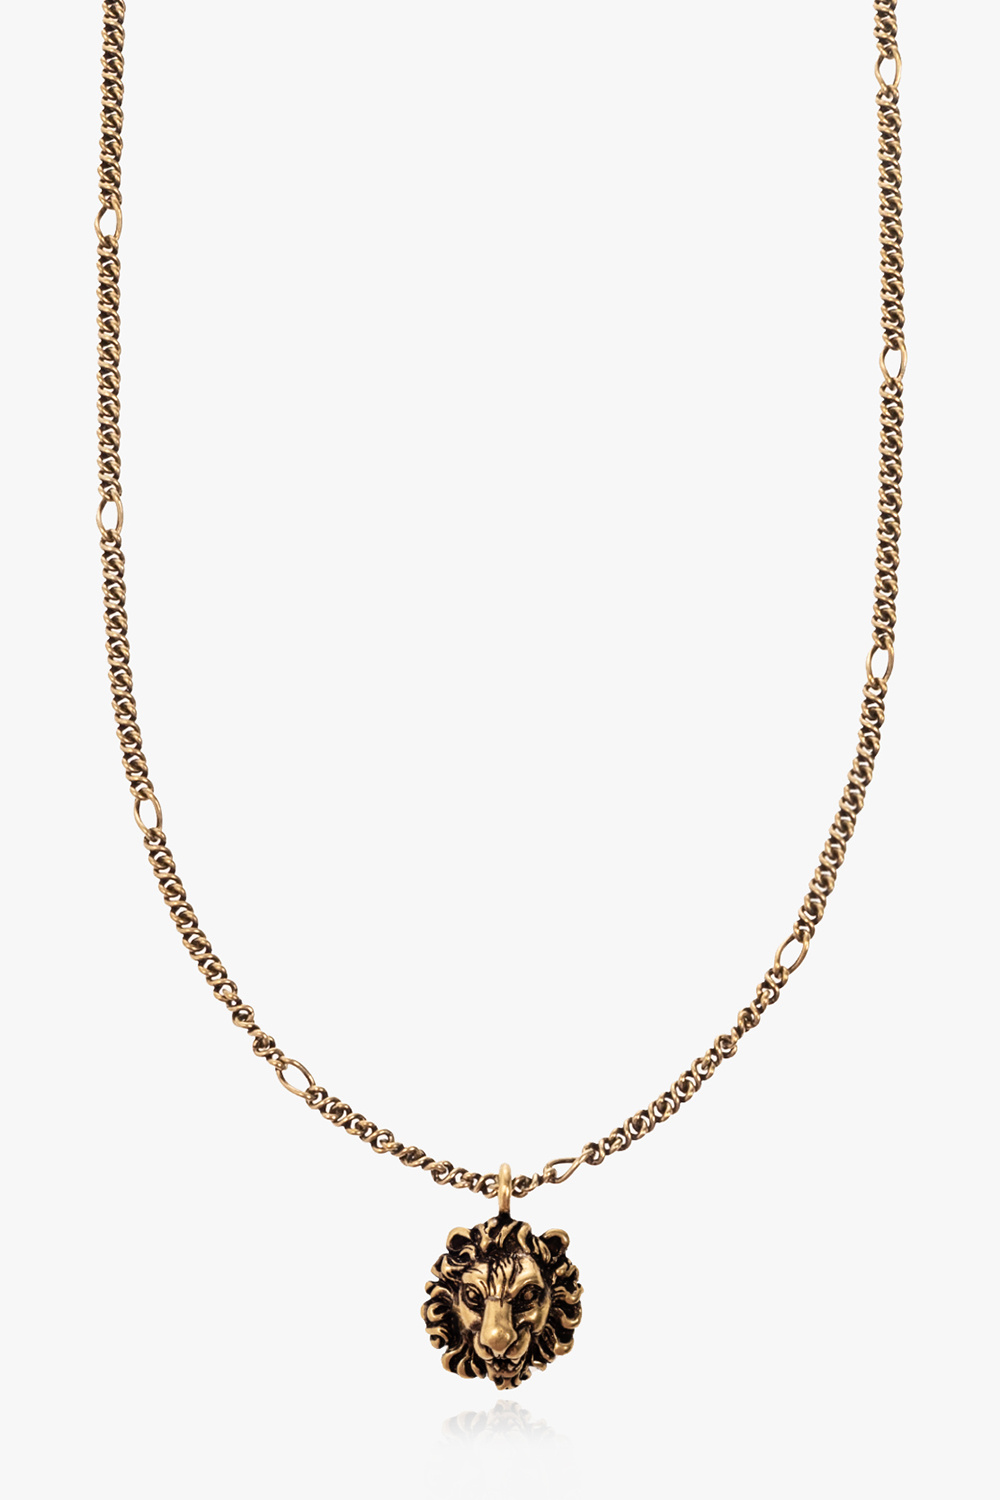 gucci amp Necklace with lion head pendant